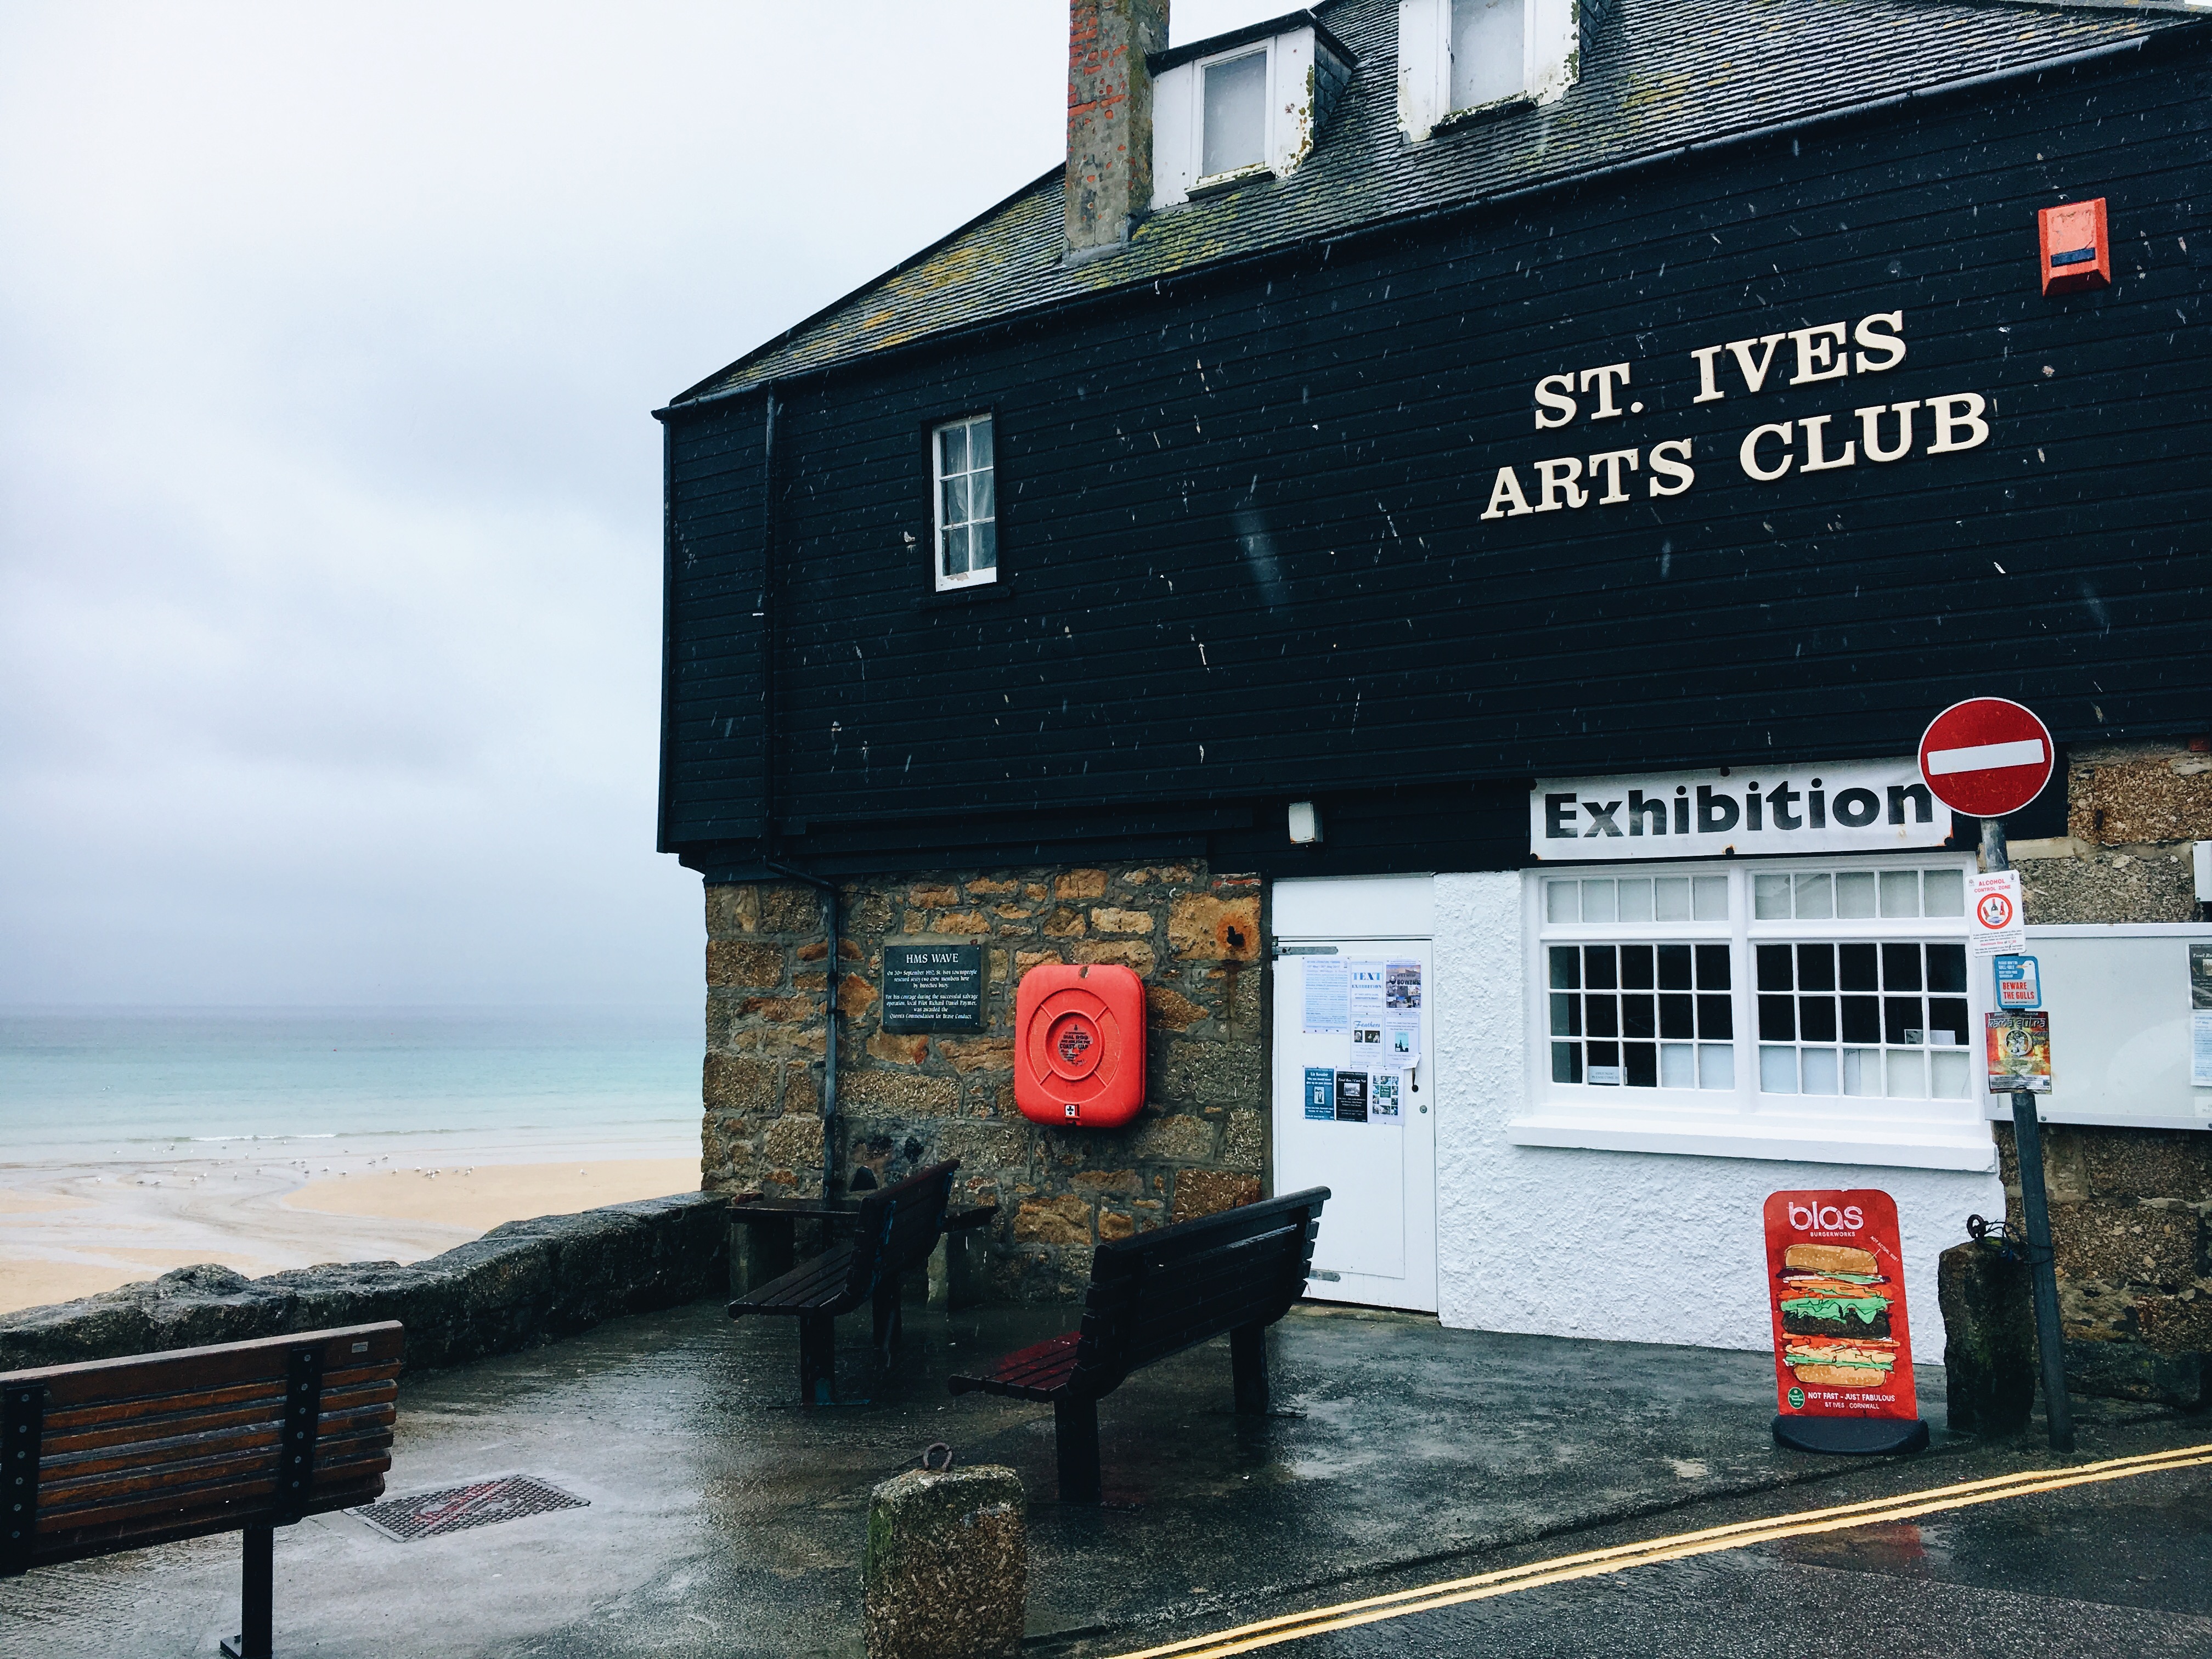 St Ives attractions what to visit where to go travel